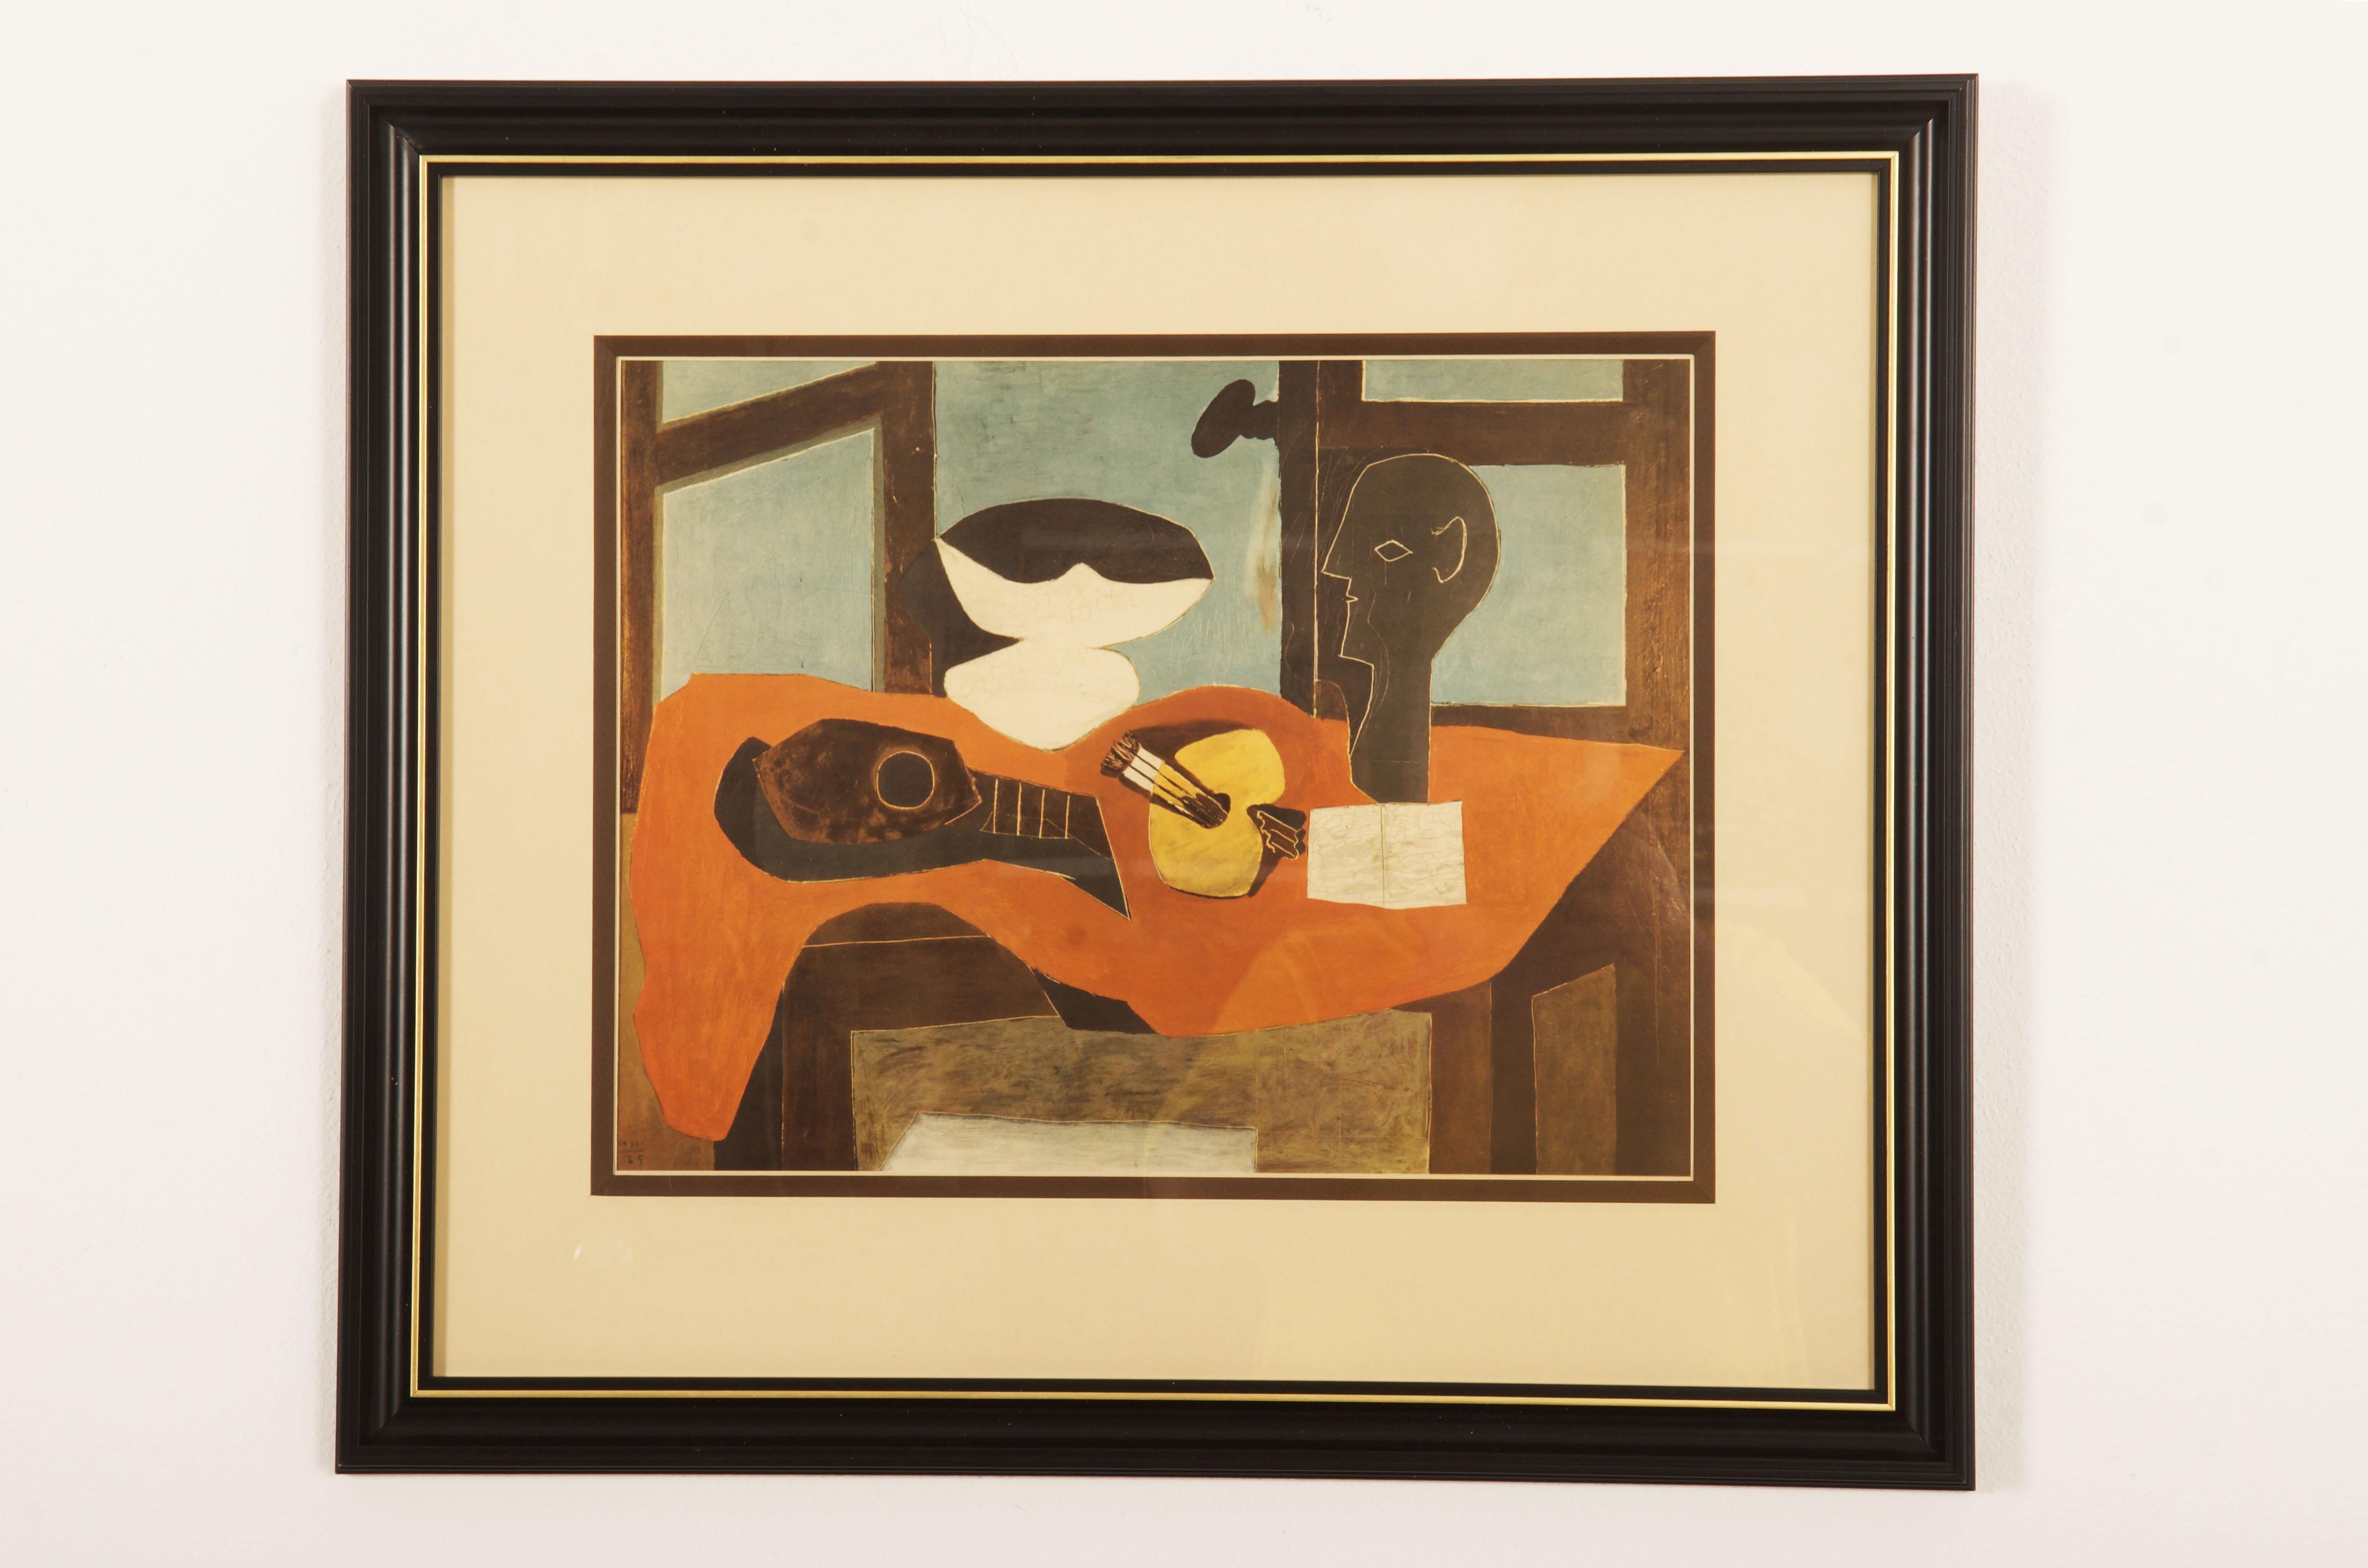 After Pablo Picasso ''Nature morte avec buste et palette'' 1930s Screenprint 37 x 47cm Sheet. Done after a painting executed in 1920s. Framed 59x68cm.